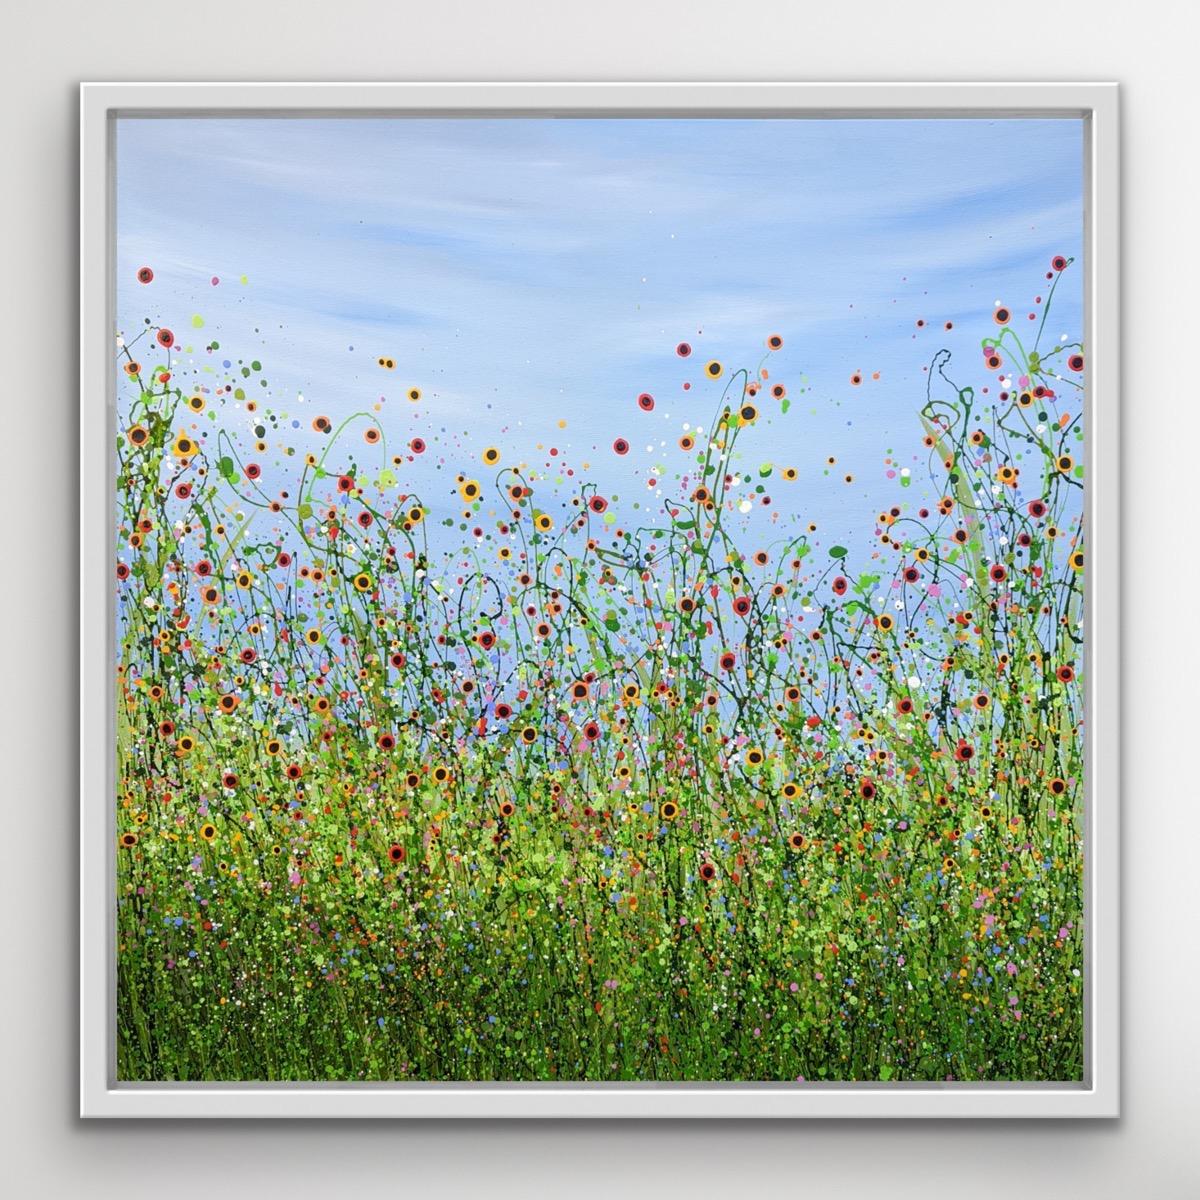 Morning Poppy Meadows #20 - An Original semi-abstract painting by Lucy Moore. Using her signature string grass technique Lucy has created a semi-abstract twist to her classic meadow paintings. Colourful poppies flowering beneath a sunlit skyline.